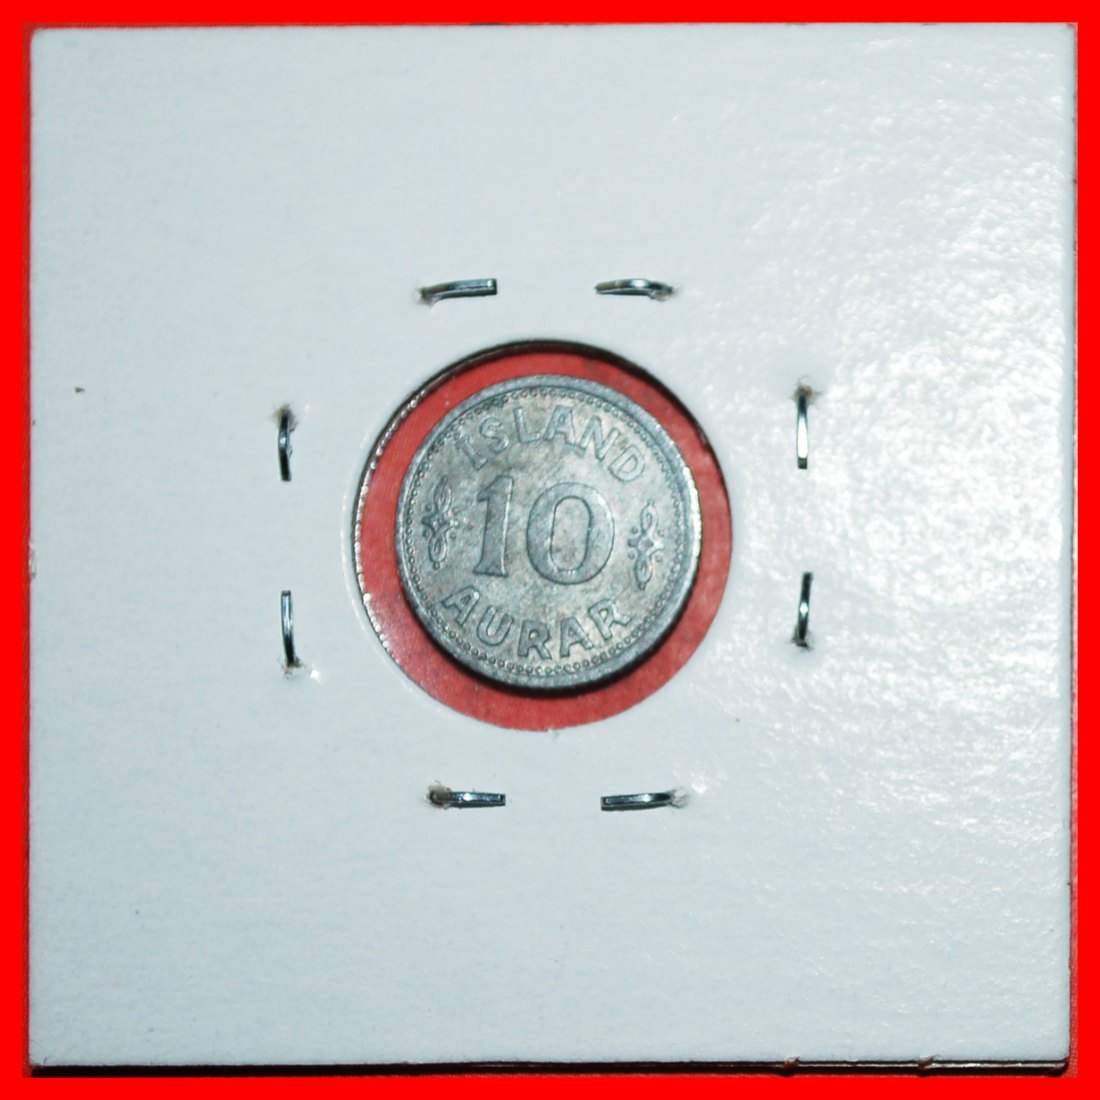  * GREAT BRITAIN FOR DENMARK'S TERRITORY: ICELAND ★ 10 ORE 1942 UNCOMMON! LOW START ★ NO RESERVE!   